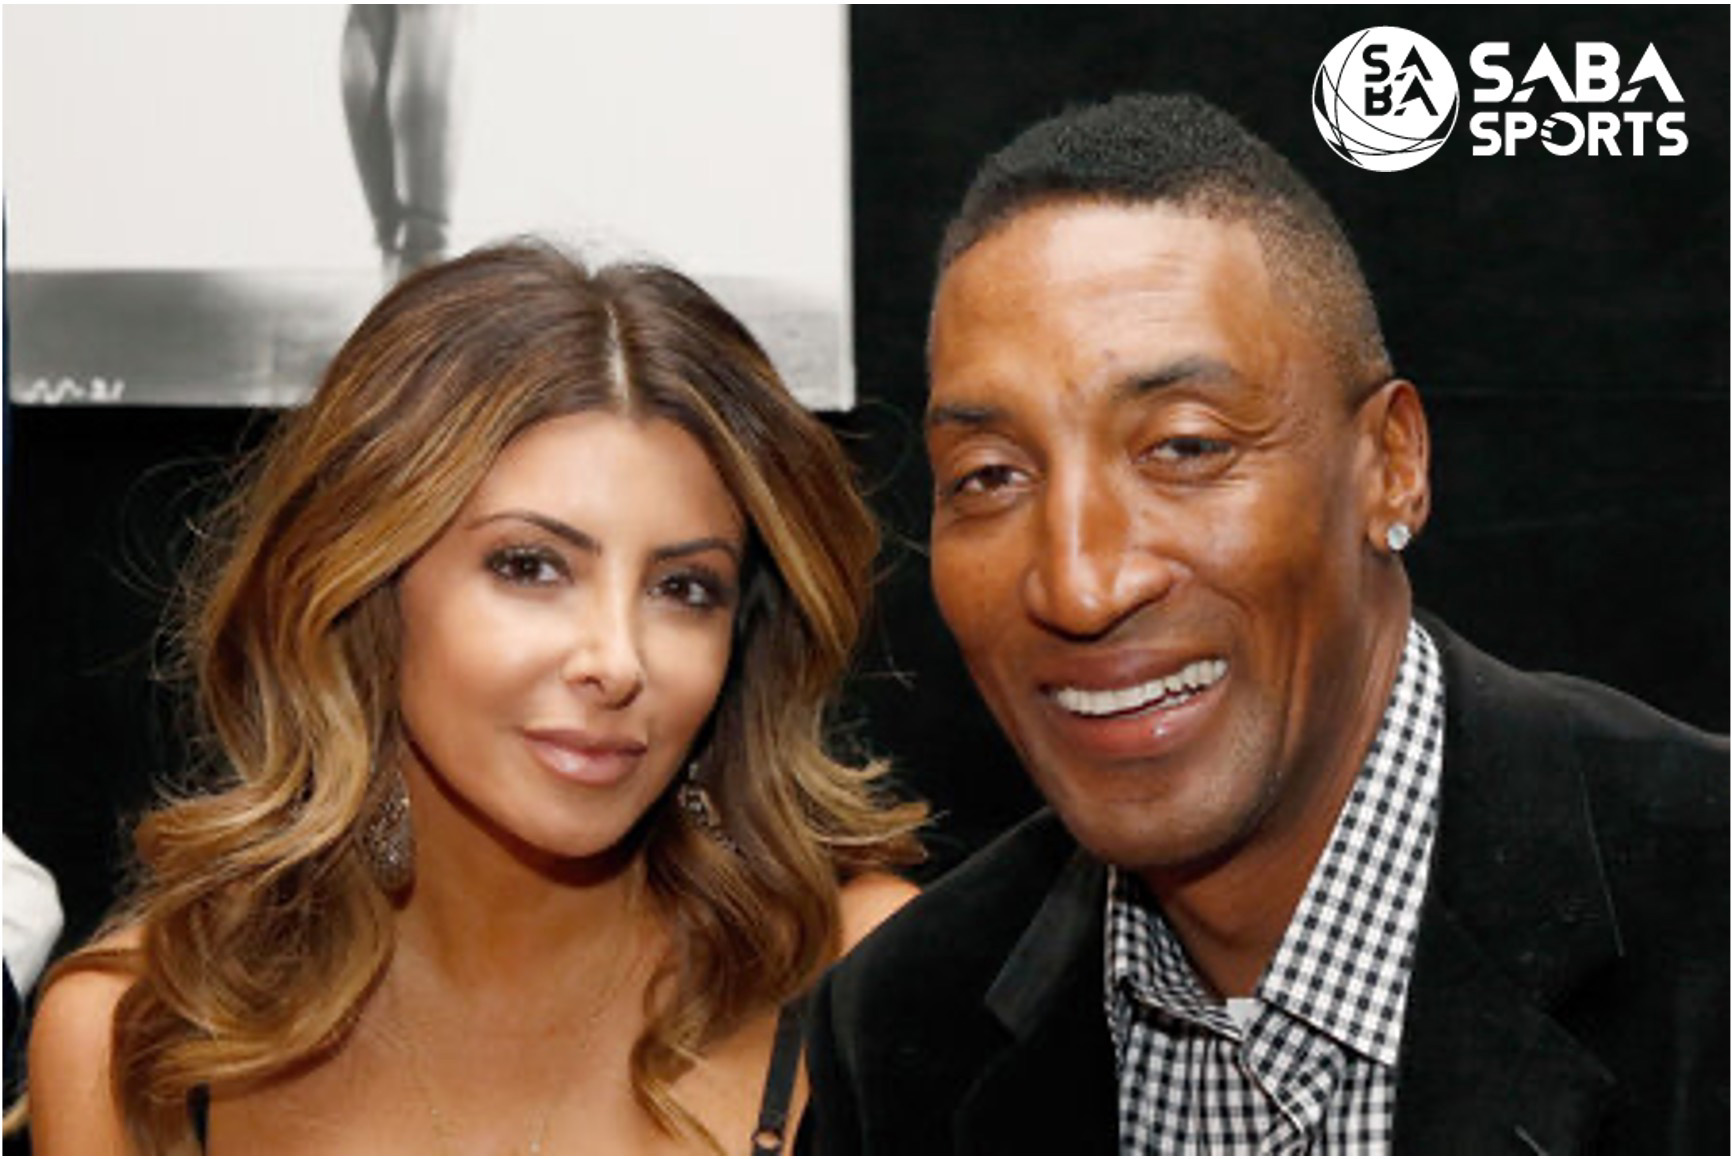 Larsa Pippen Shocked Fans Claiming She Had Sex Four Times a Night for 23 Years During Her Marriage to Scottie Pippen image photo